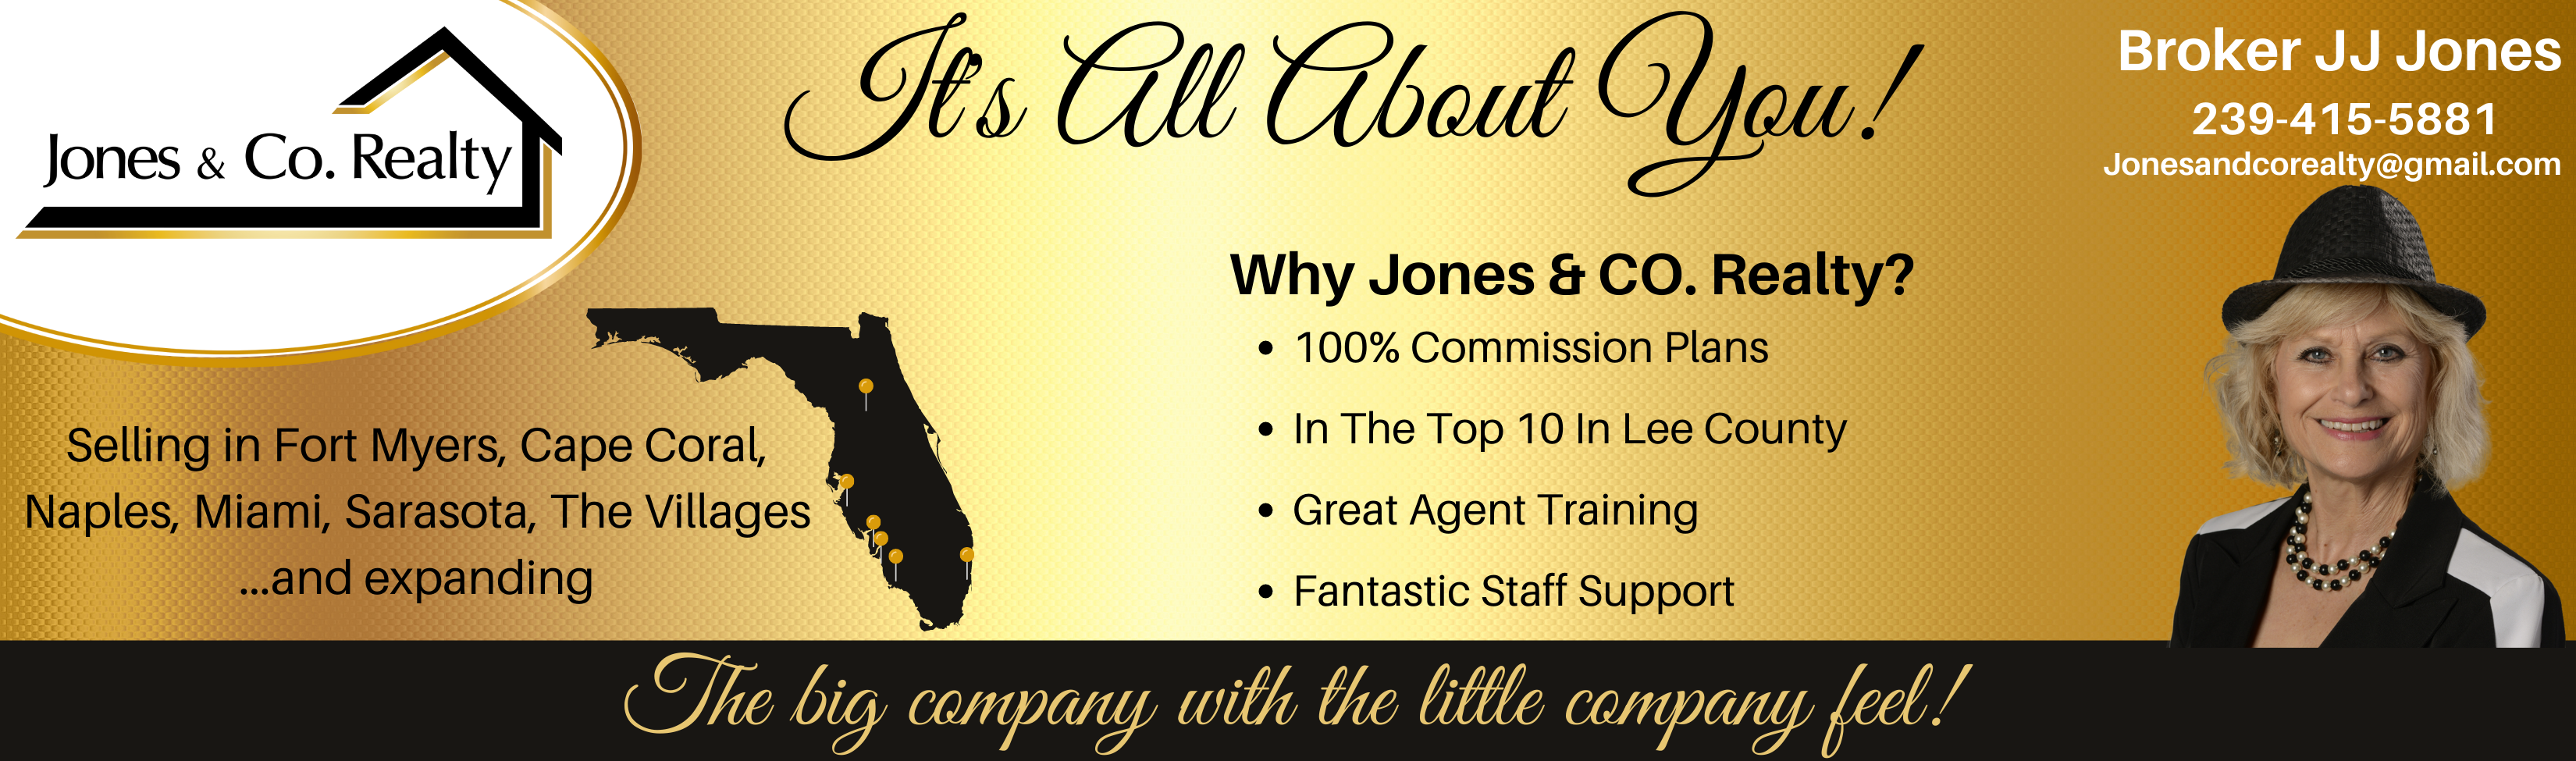 Jones and Co Realty